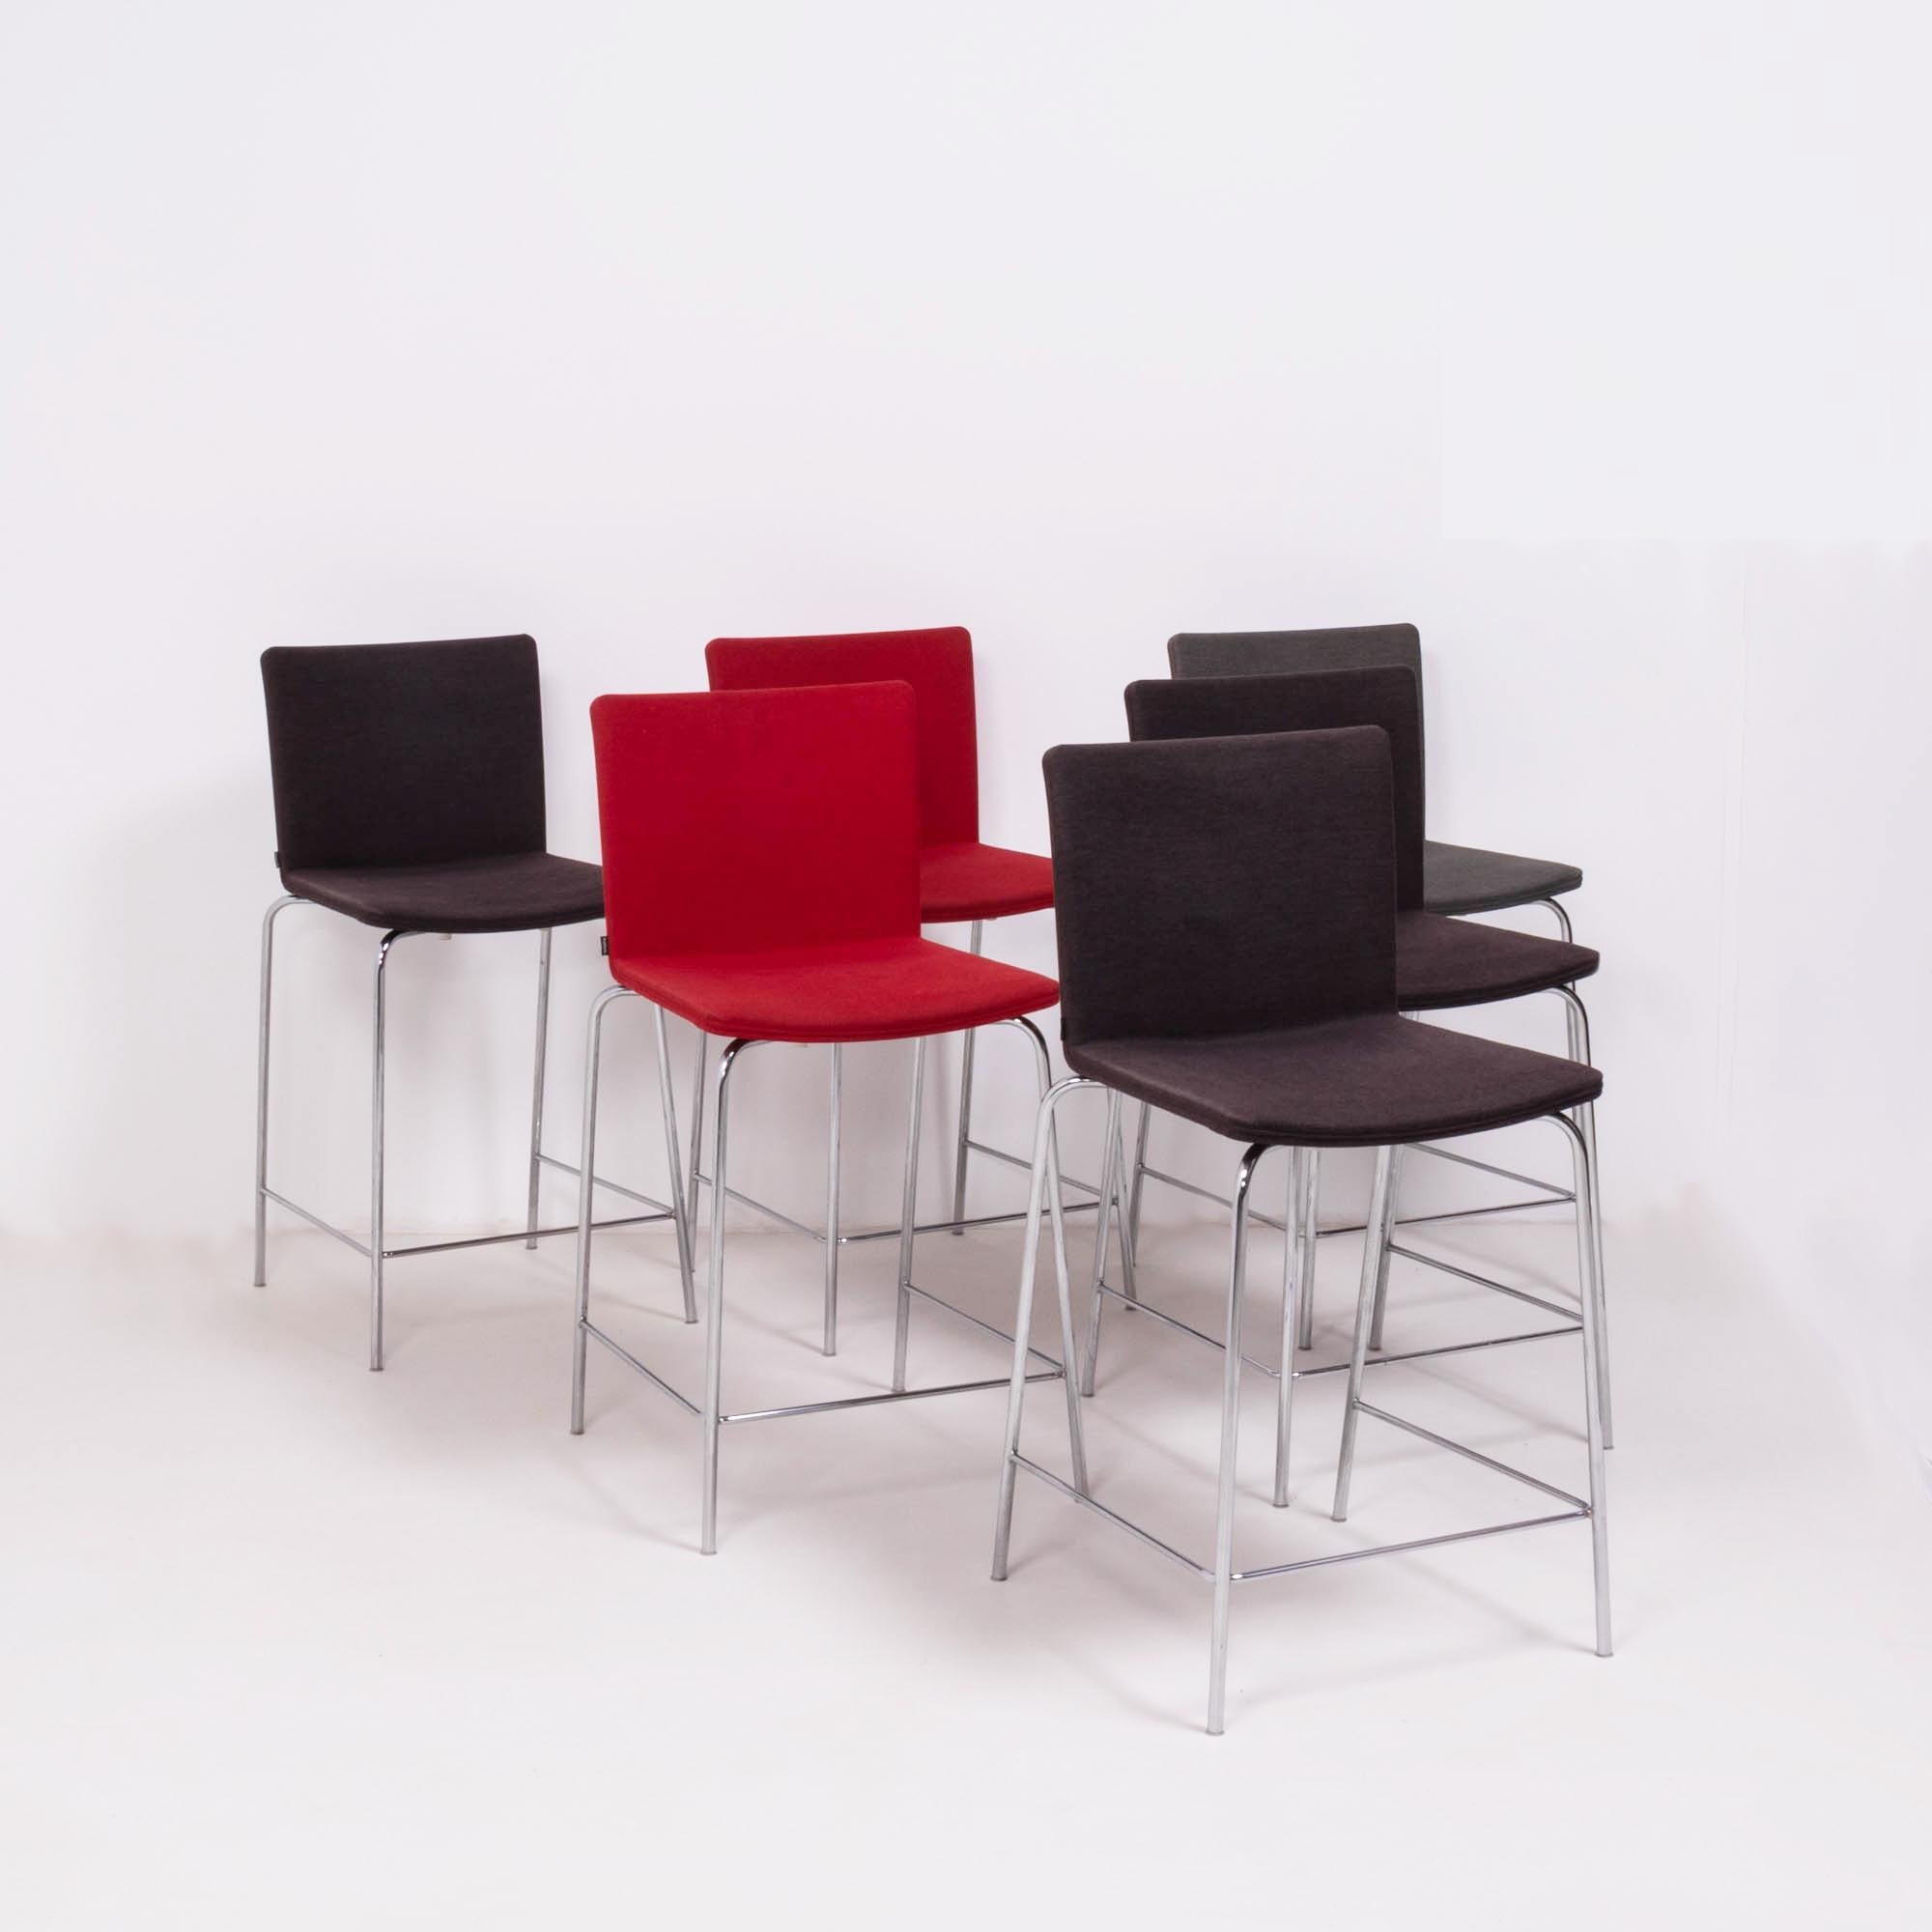 Originally designed by Mario Mazzer for Poliform in 2003, the Nex stool is the epitome of sleek and modern design.

Featuring a chromed metal frame with a foot rail, the seats are molded for comfort and are upholstered in a selection of classic